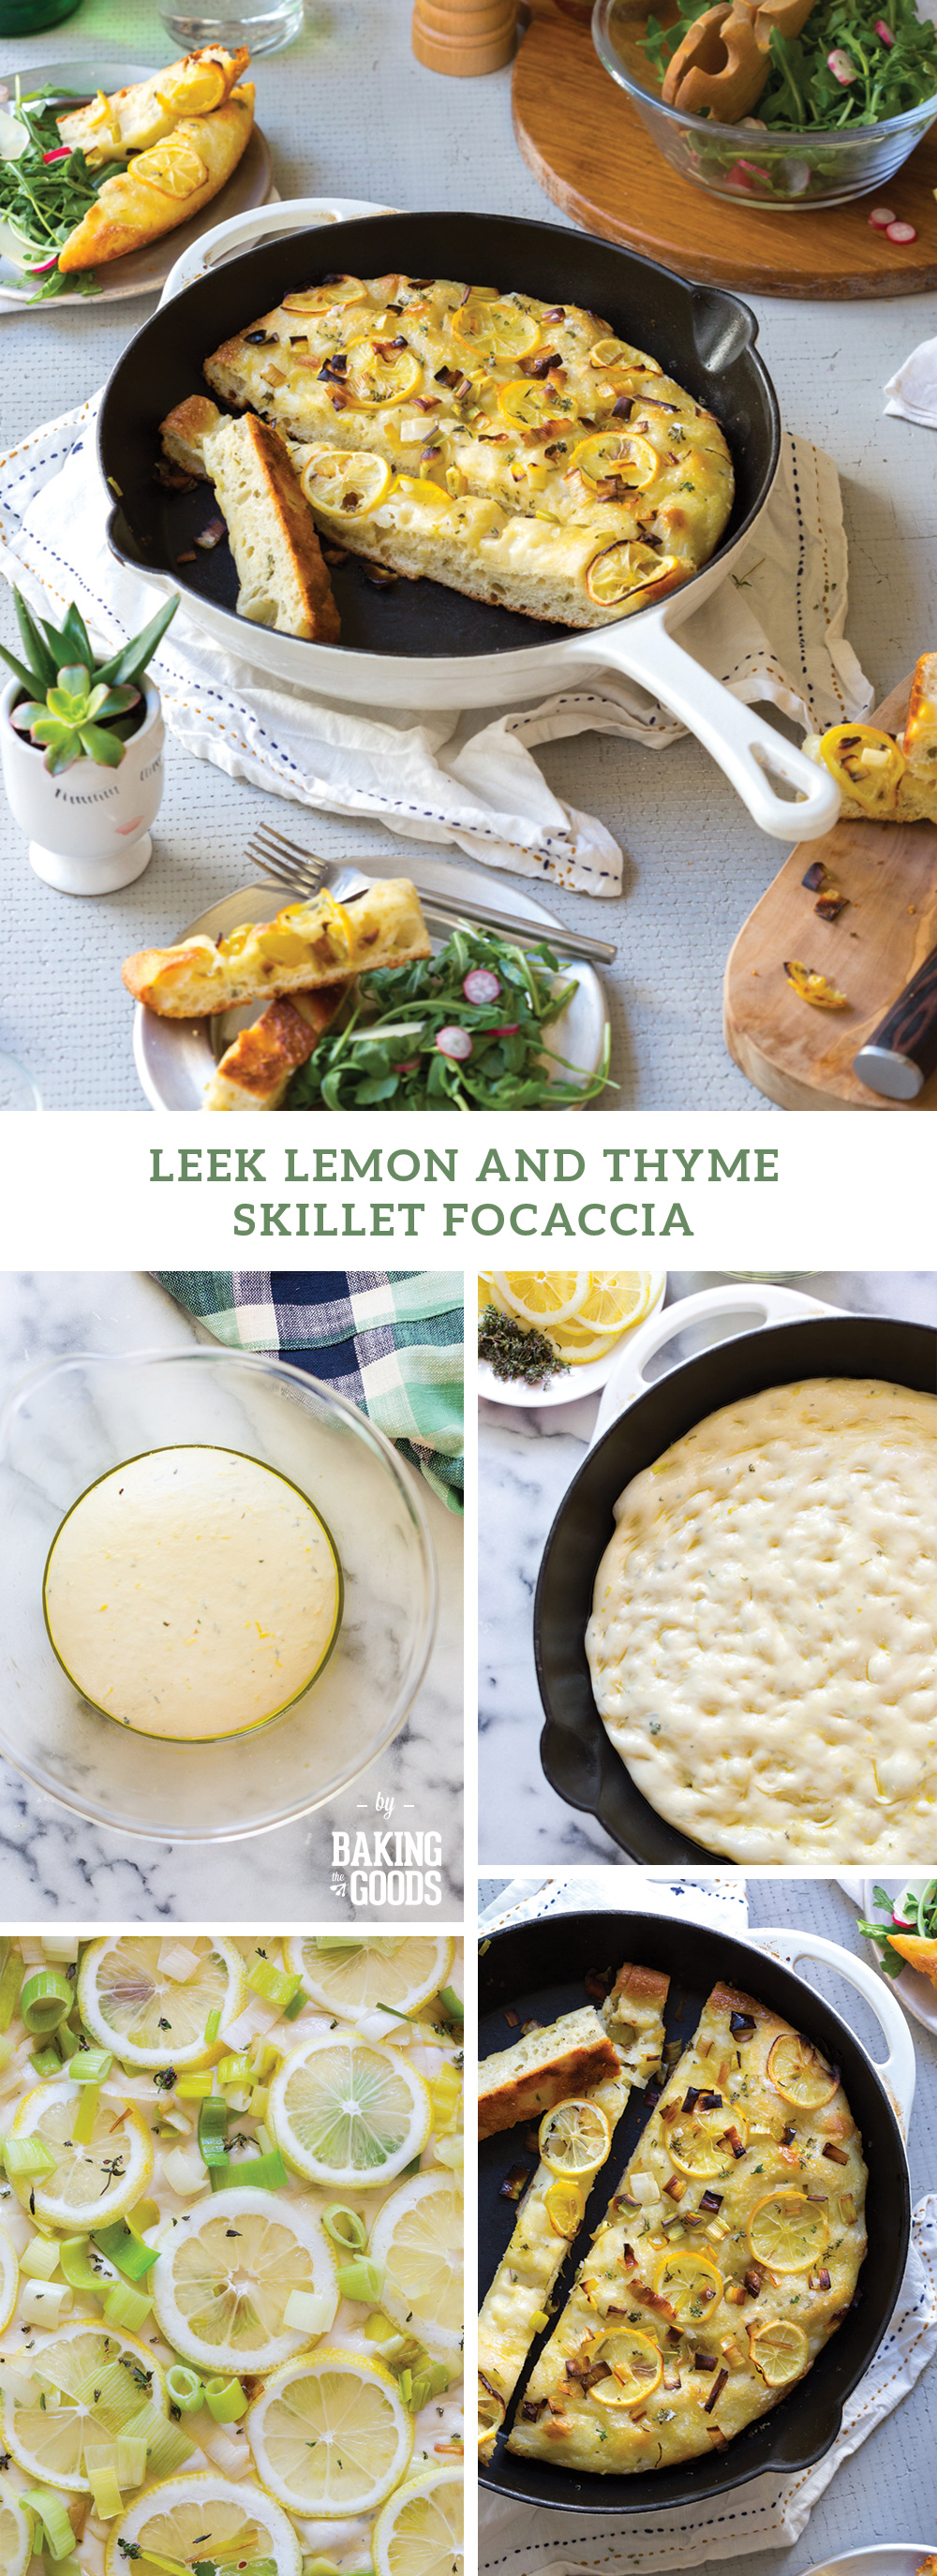 Leek Lemon and Thyme Skillet Focaccia by Baking The Goods